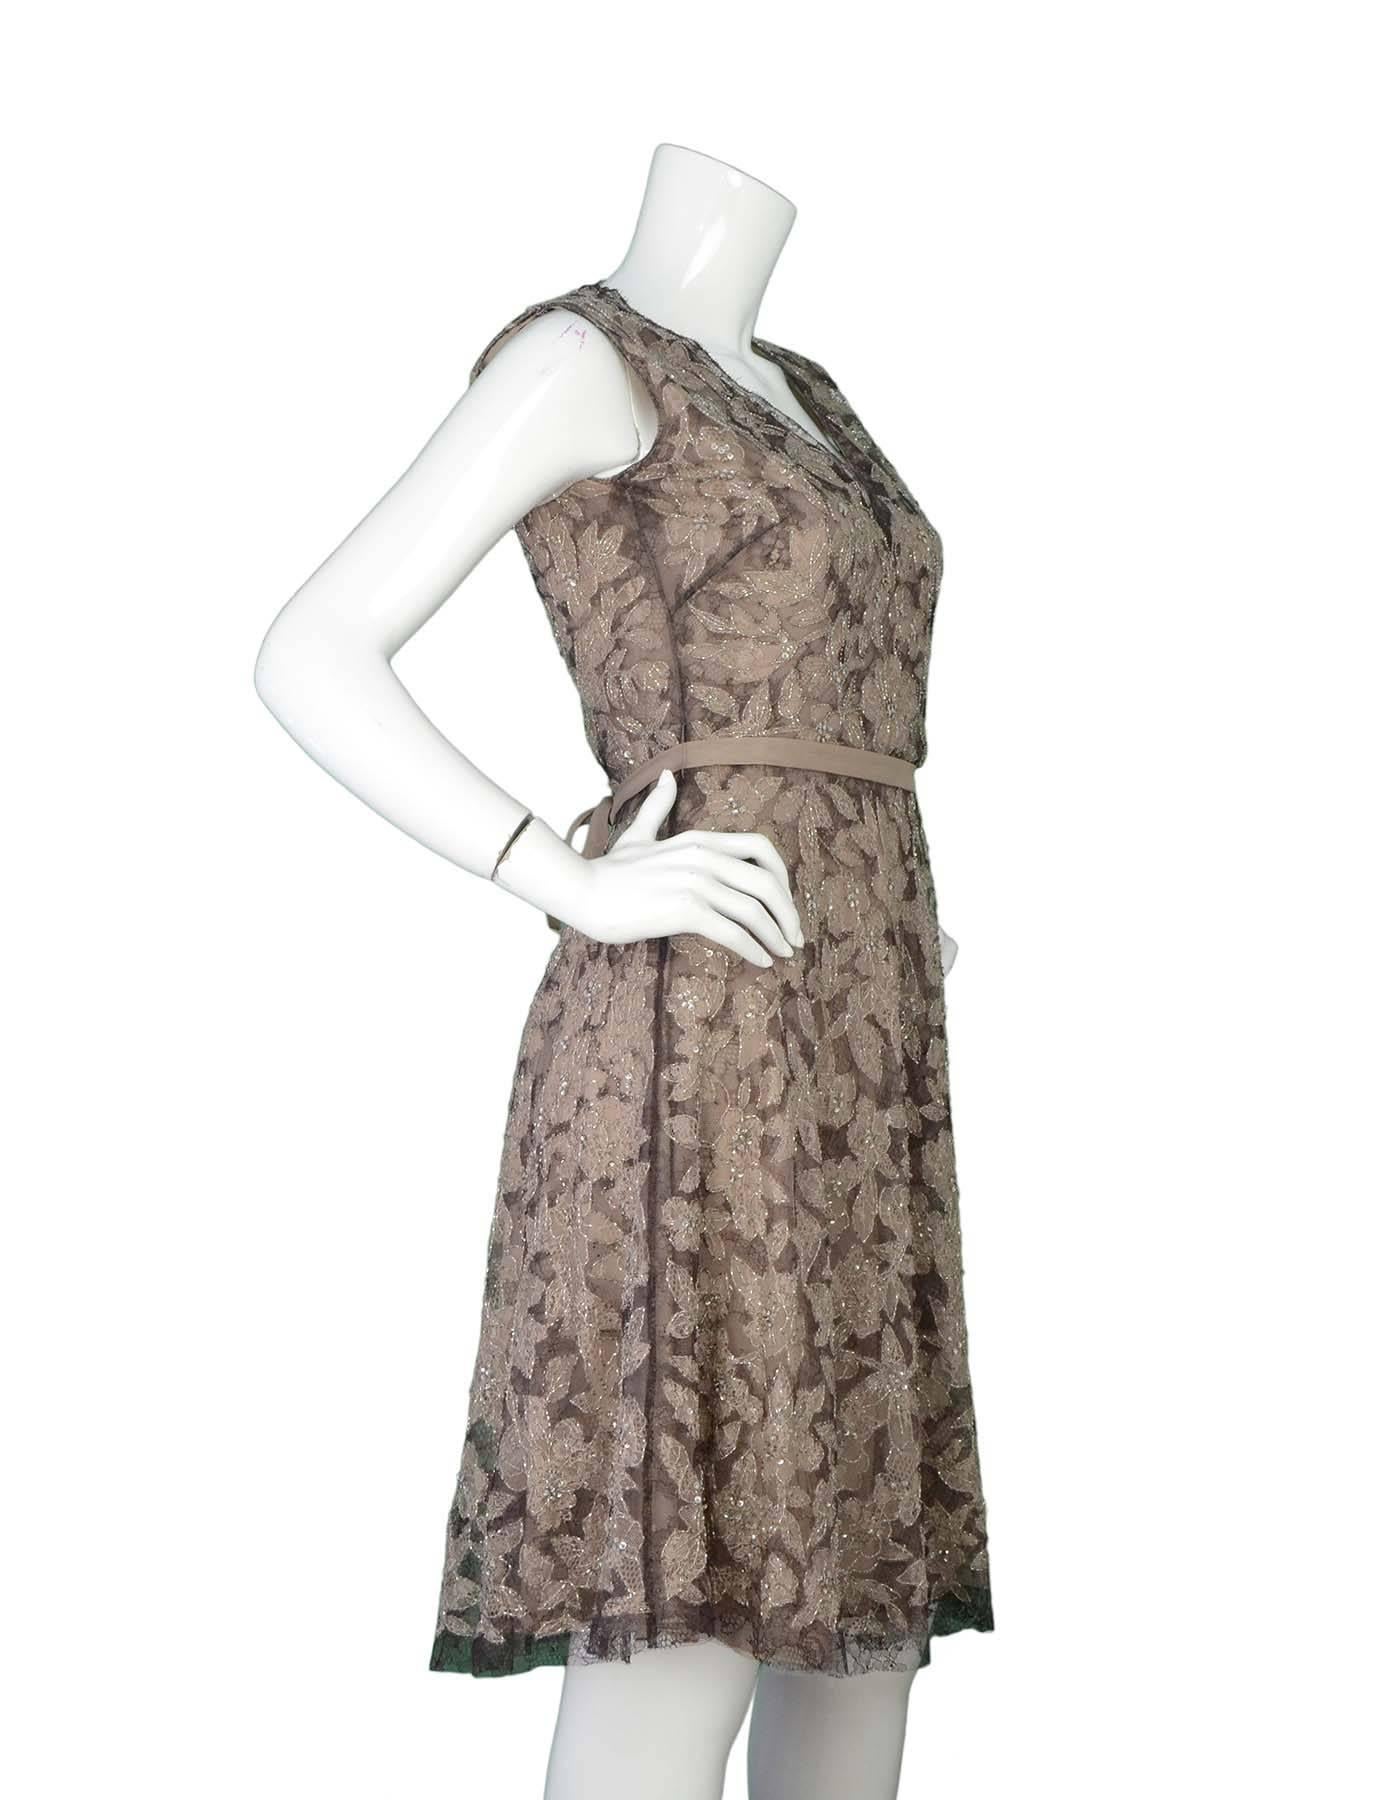 Valentino Beaded Sleeveless Dress sz Small
Features floral lace and beaded detail throughout with tie belt at waist

Made In: Italy
Color: Beige and brown
Lining: Beige lining
Closure/Opening: Zip closure at back
Overall Condition: Excellent